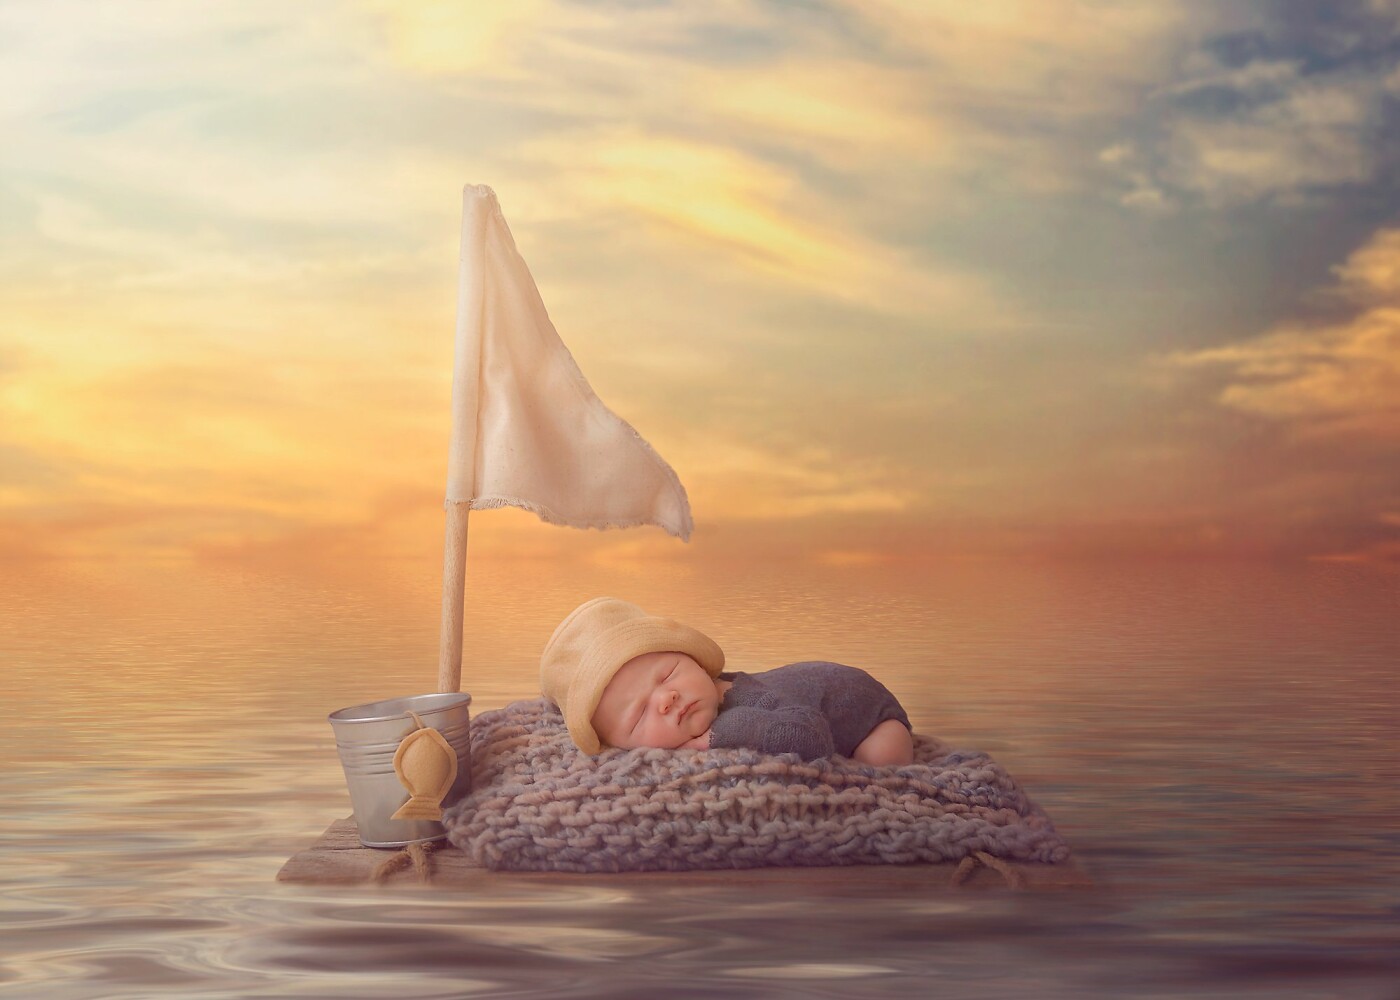 This image was a composite image. I felt like having a little play around and being a bit creative. The raft is home made, and the image was taken in my home based studio. It was a cloudy day, so I used my Jinbeii continuous light. I then used a gorgeous digital backdrop :)